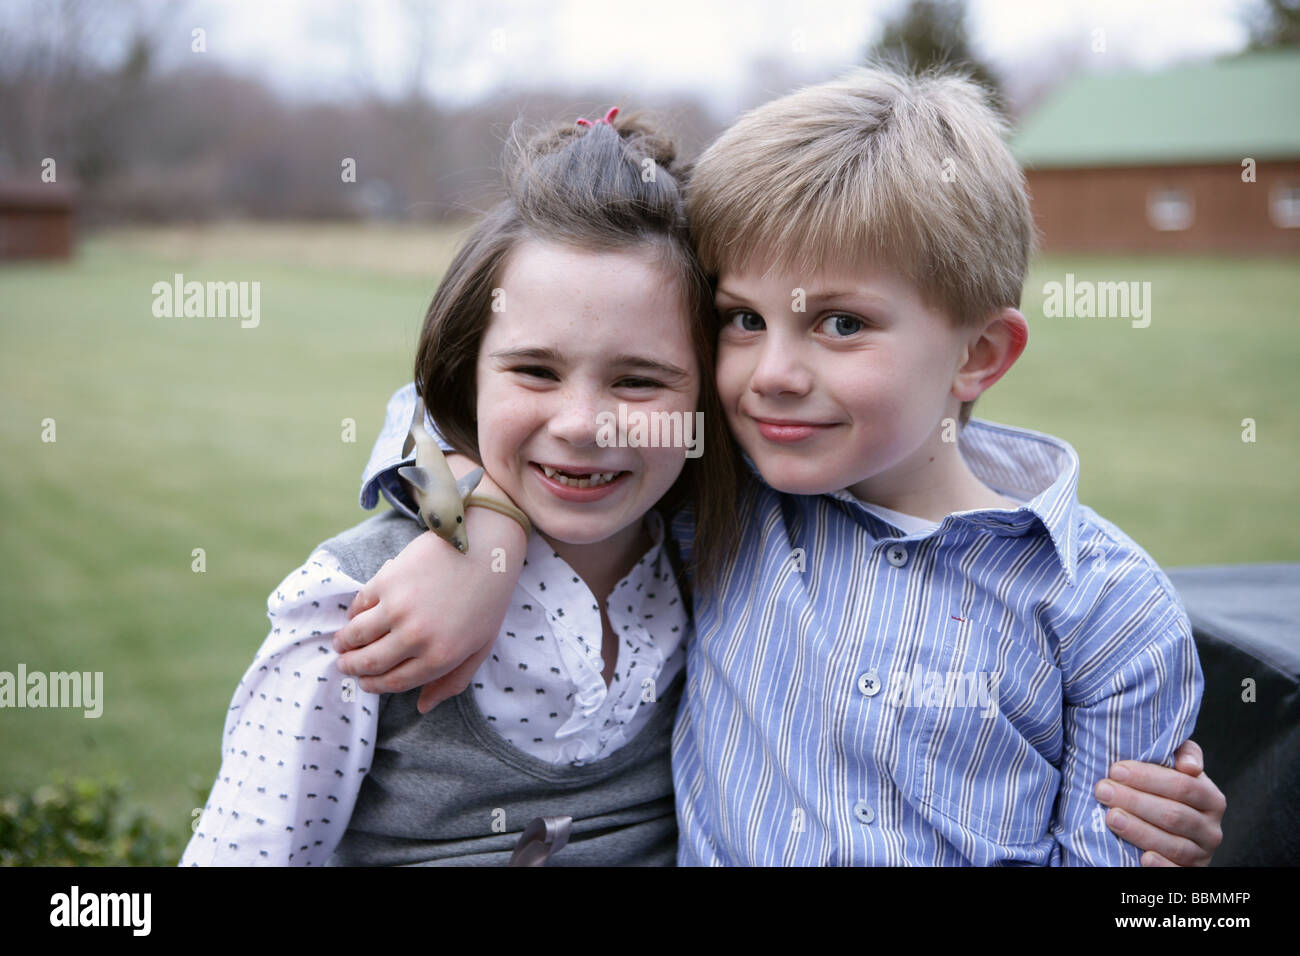 Two cute children posing for a picture Brother and sister or friends. Young love. Stock Photo